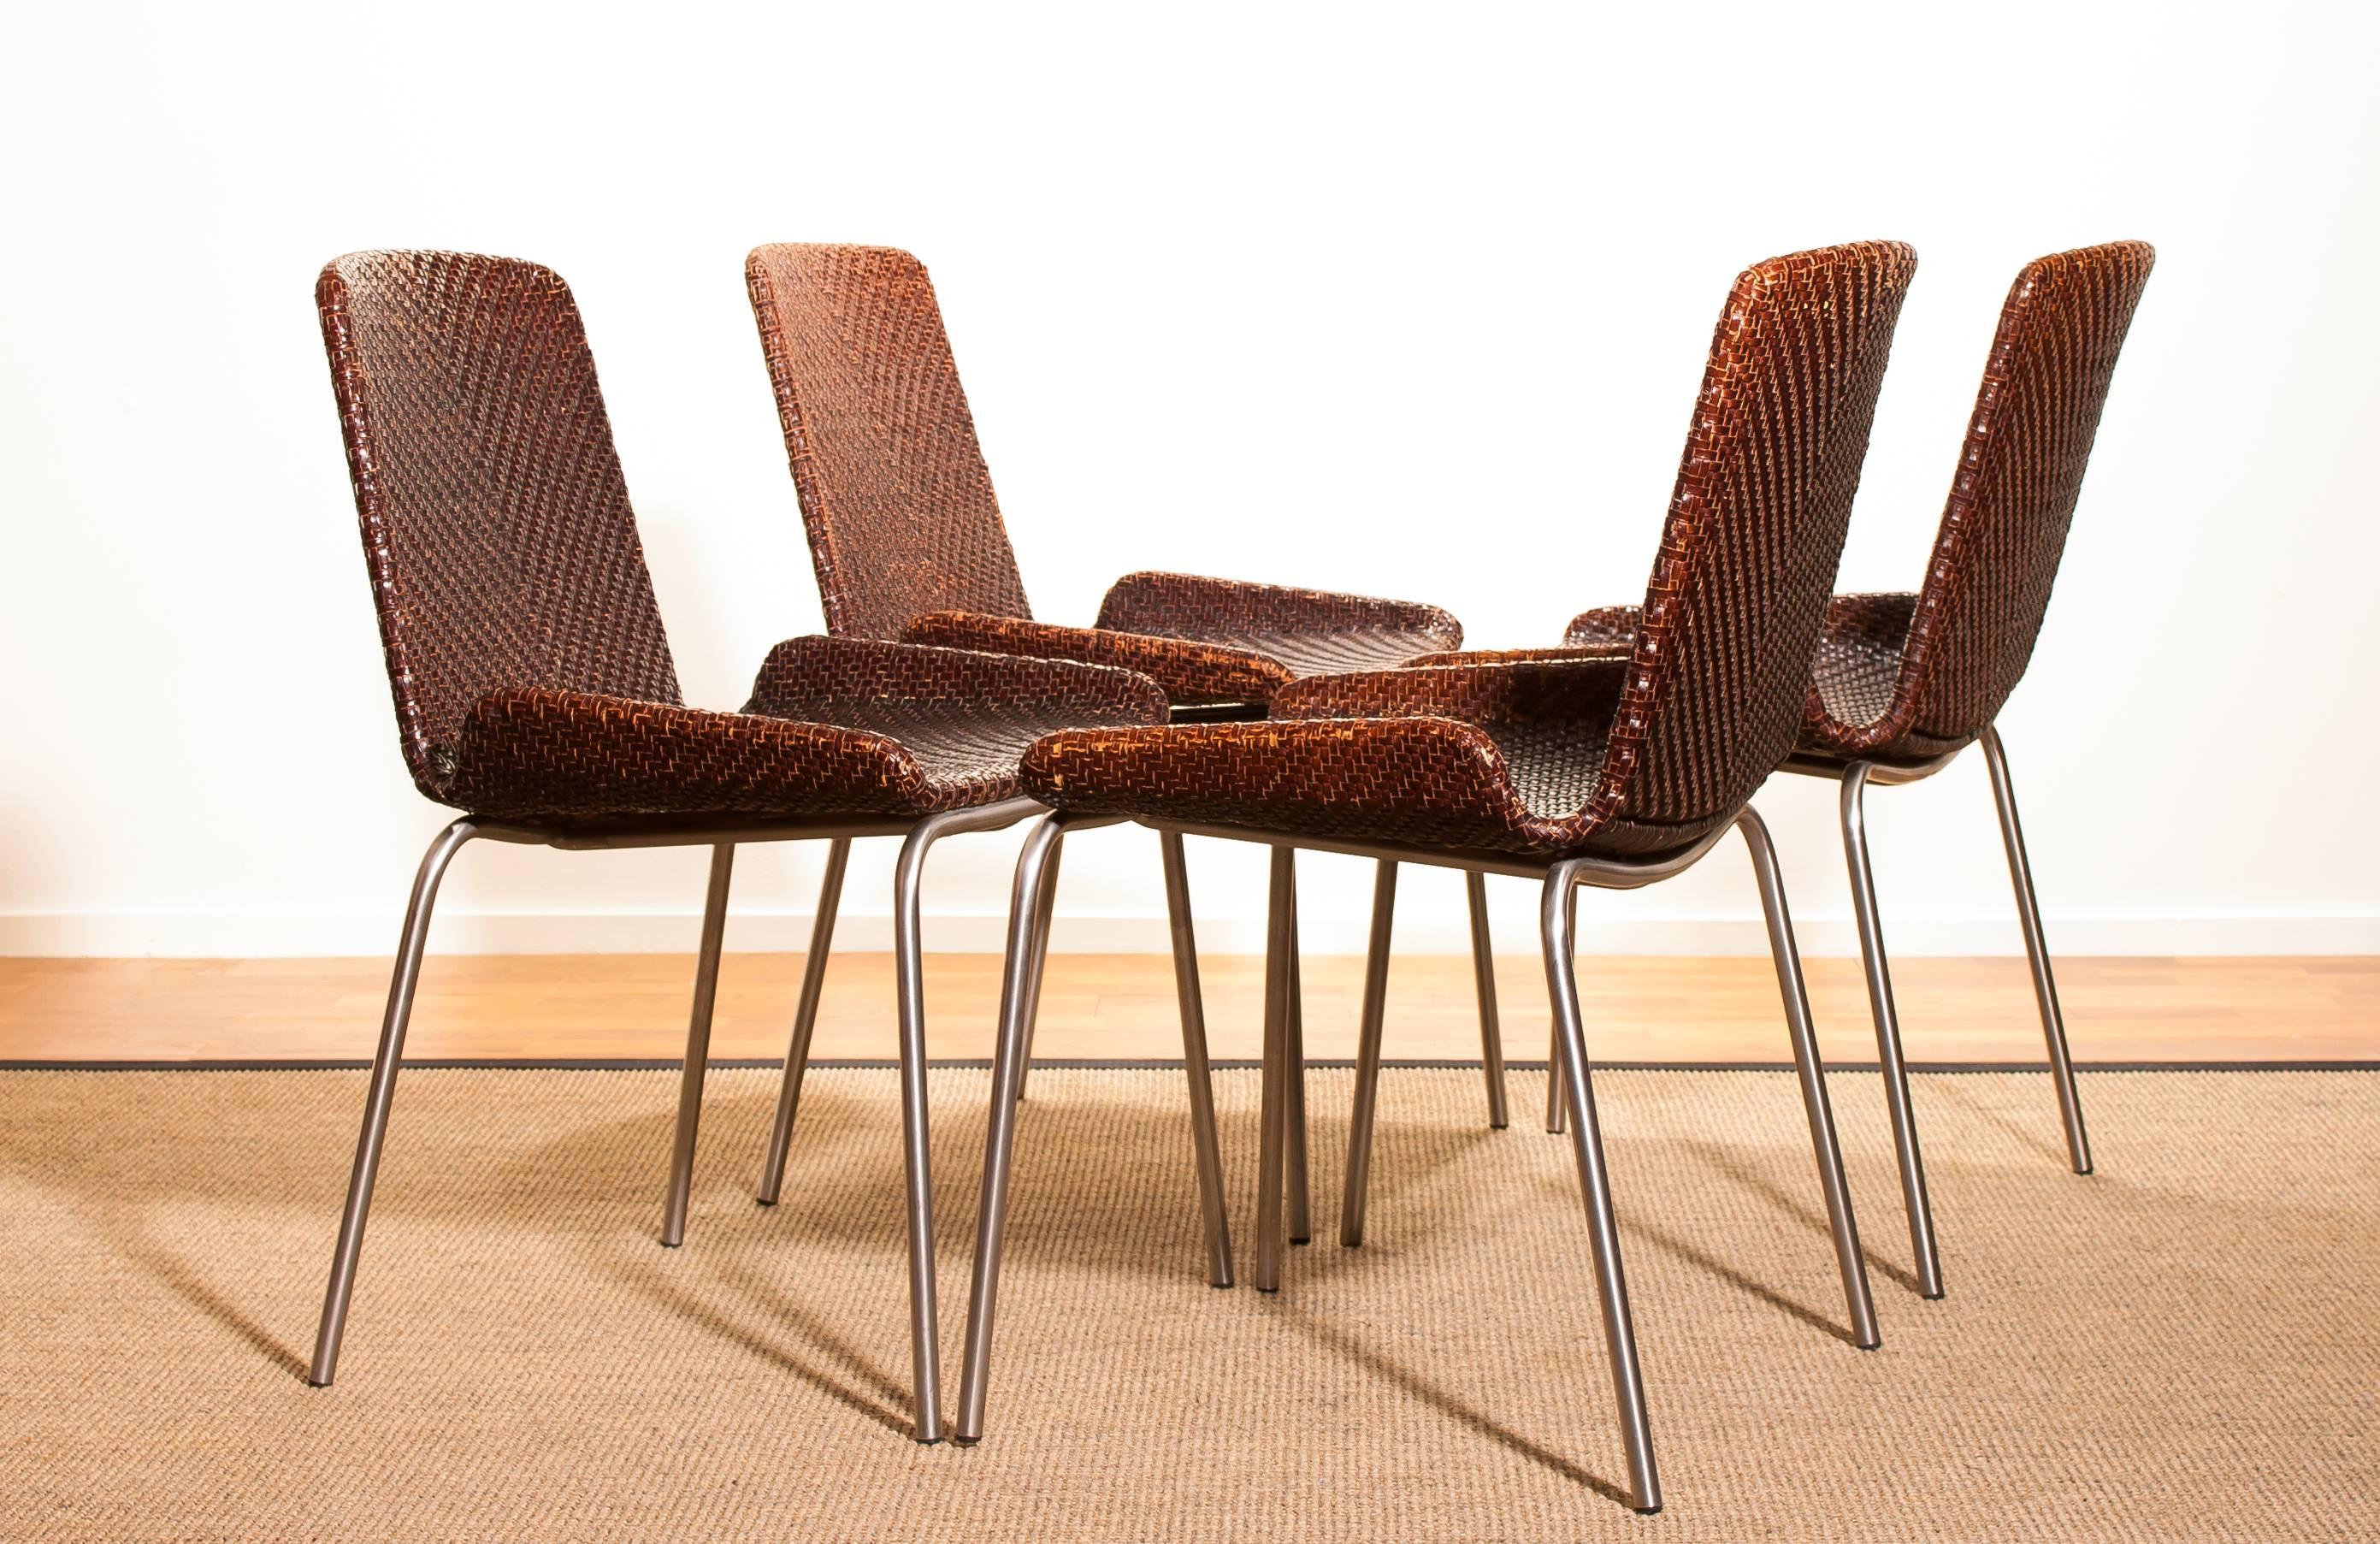 An amazing set of four dining chairs made in Italy.
These chairs have a brown leather braided seating and backrest on a steel frame.
They are in a wonderful condition.
Period 1960s
Dimensions: H.84 cm, W.51 cm, D.45 cm, SH.46 cm.
 